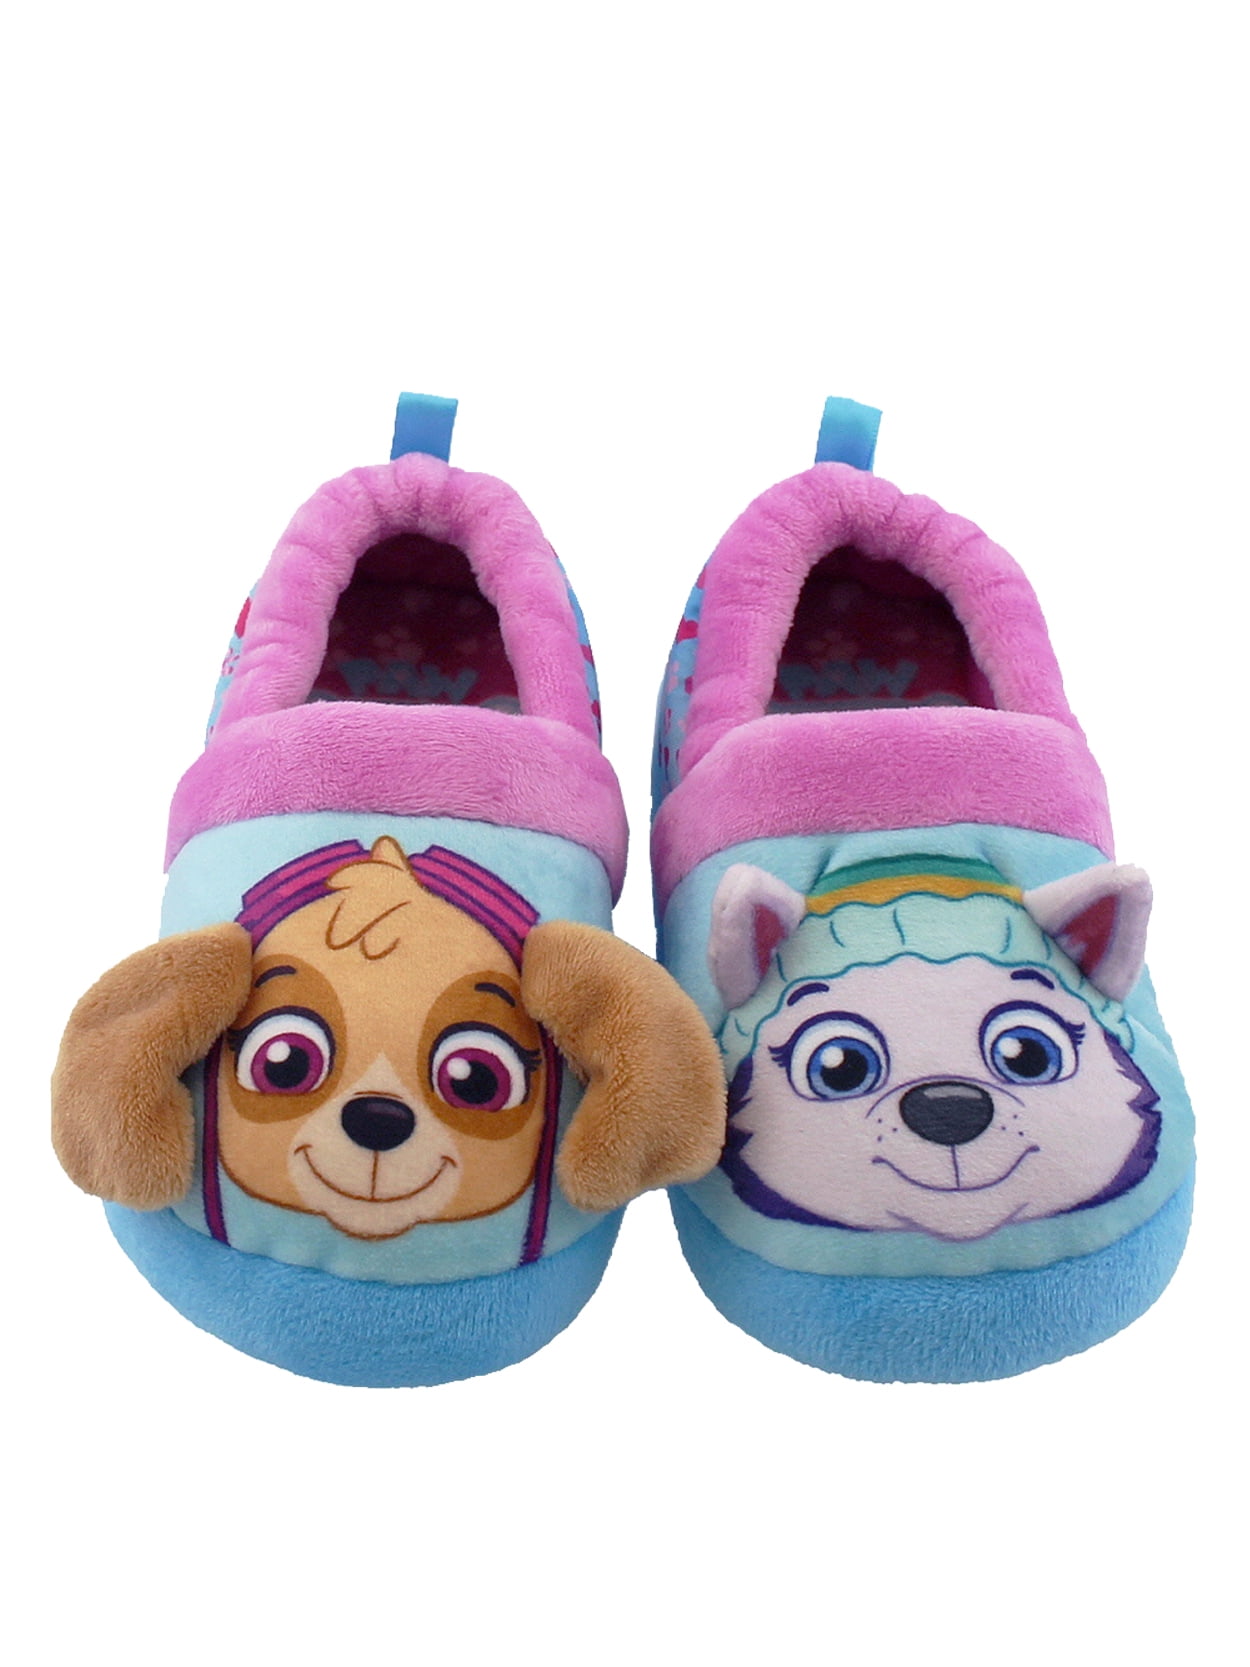 size 7/8 NWT Toddler Girls PAW PATROL SKYE Cushioned Slippers 